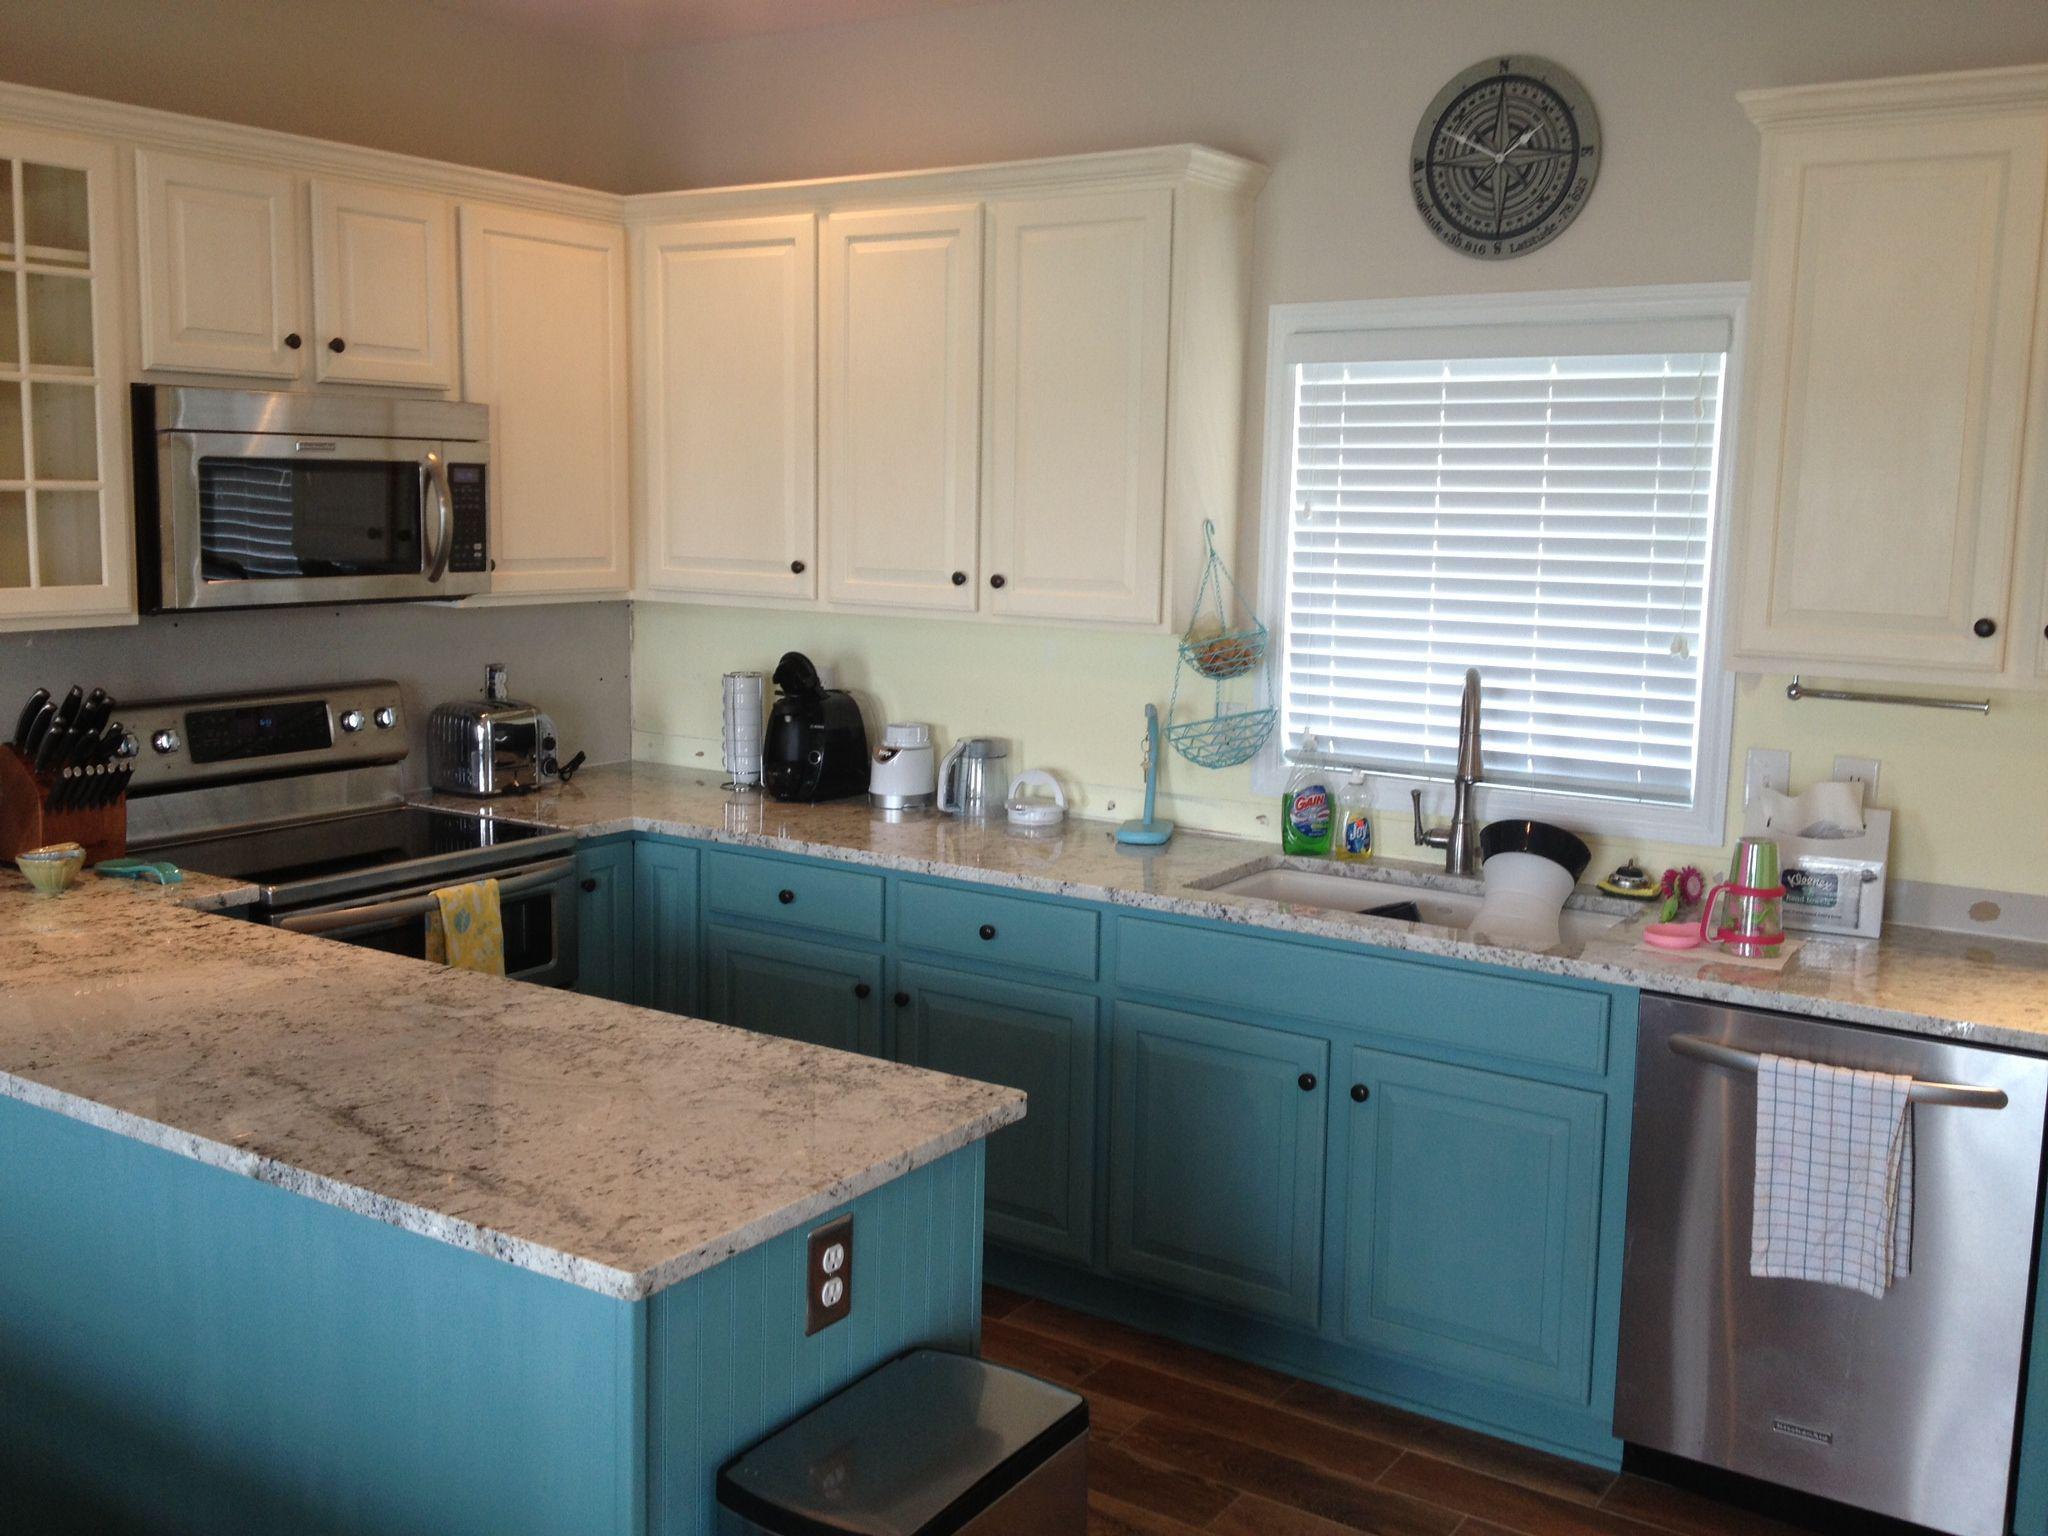 Chalk Painting Cabinets In Small Kitchen